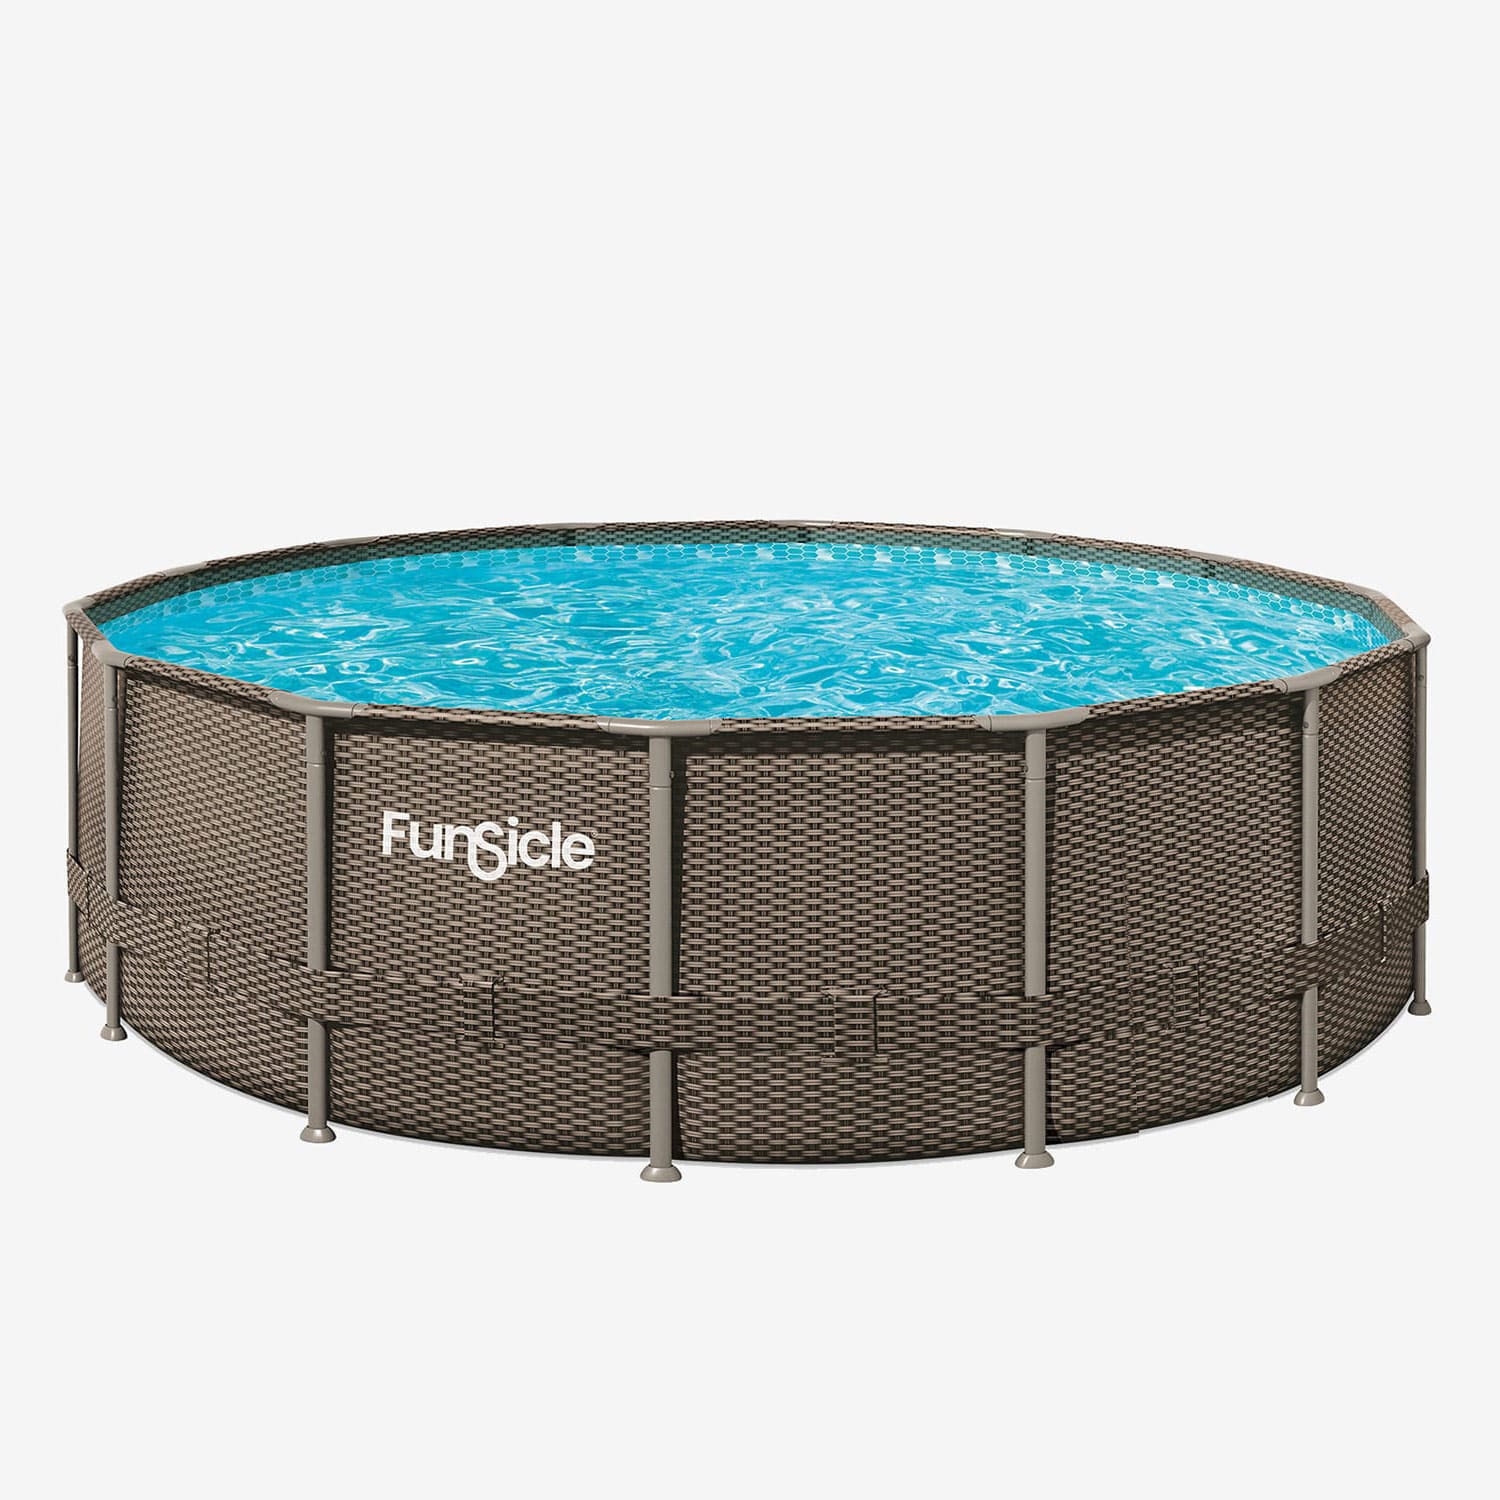 Funsicle 16 ft Oasis Designer Pool - Dark Double Rattan without people